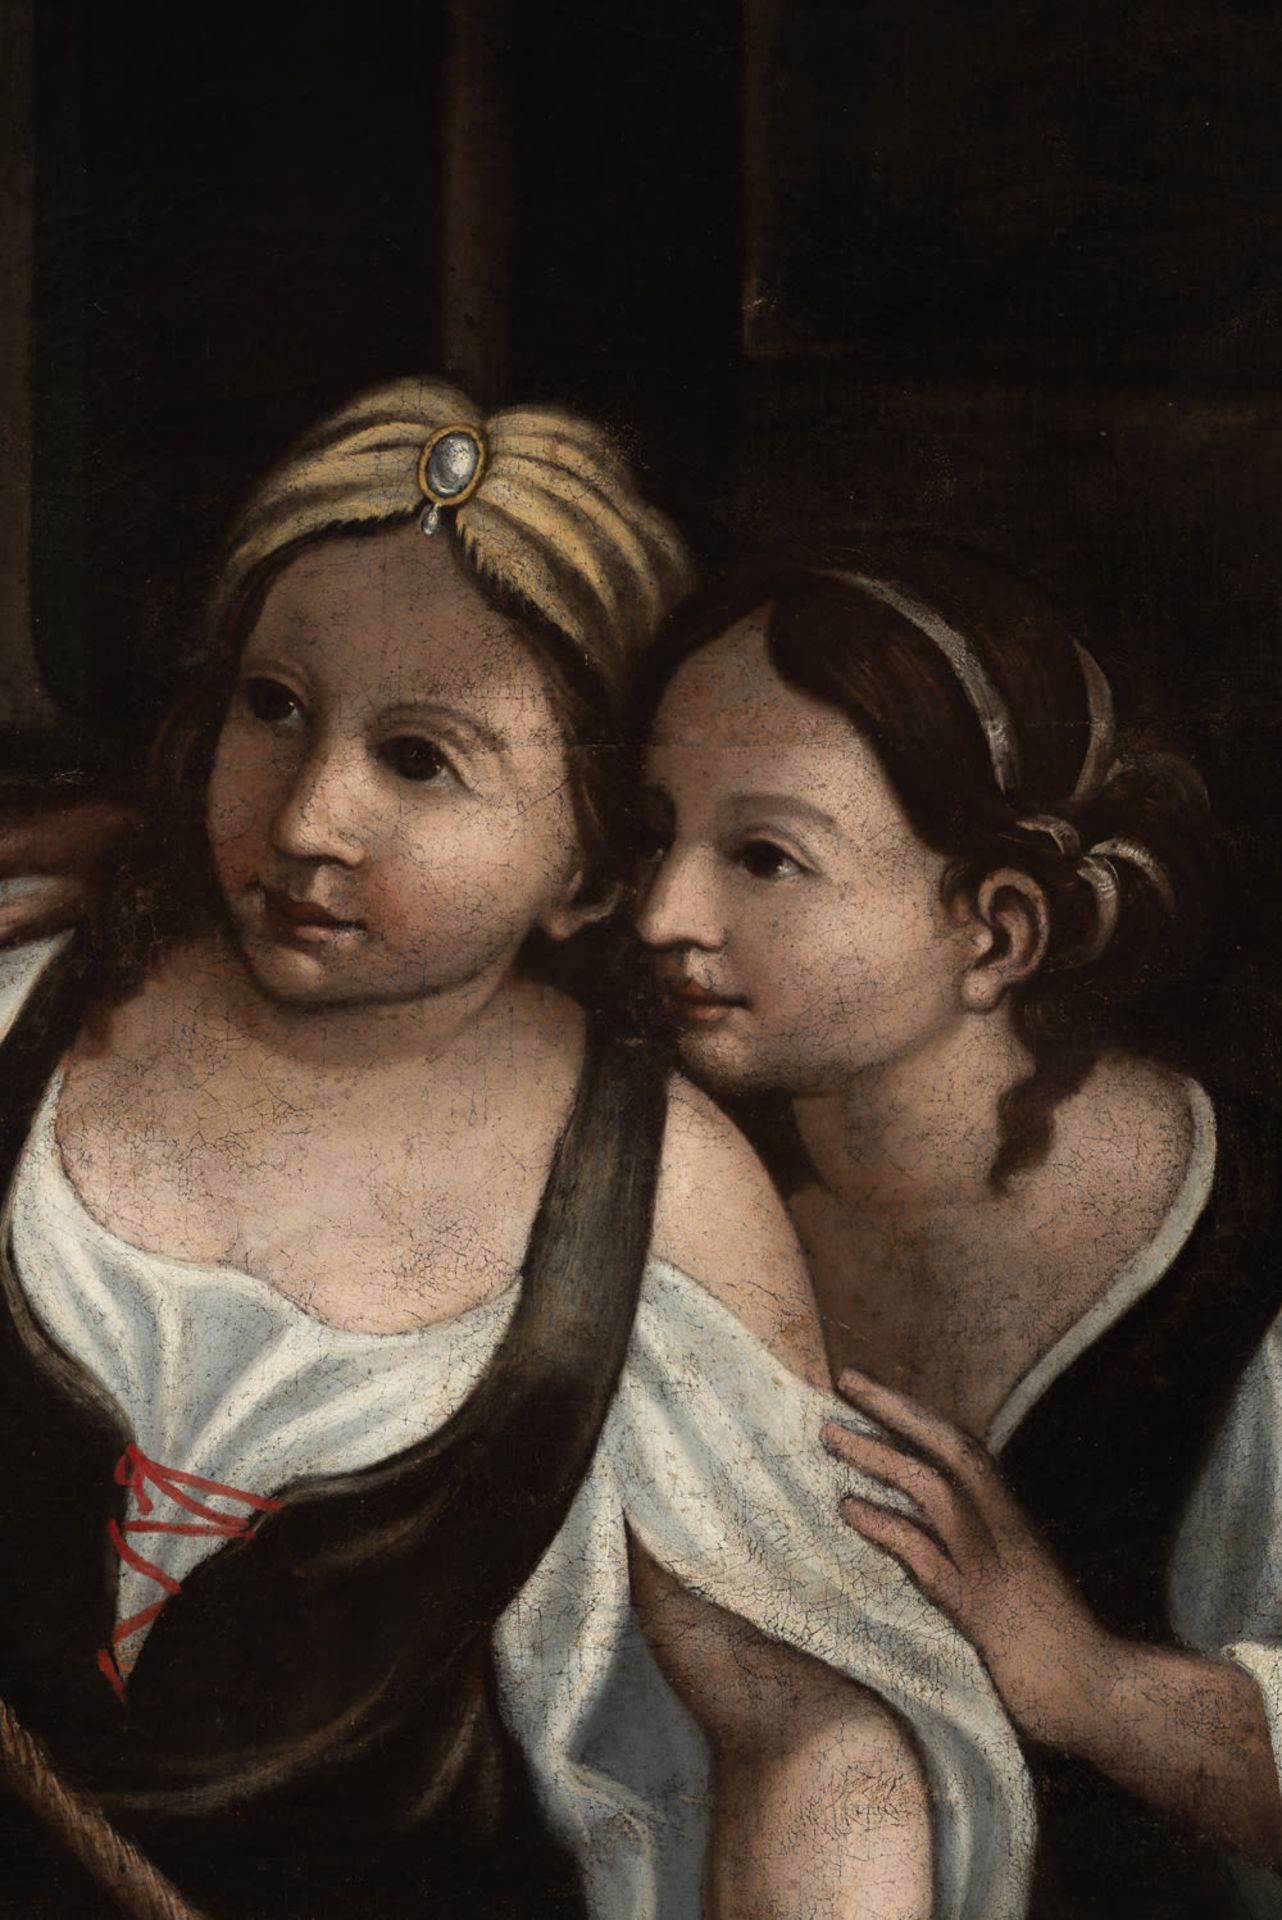 Italian school of the seventeenth century. Girls in the stable. - Image 2 of 6